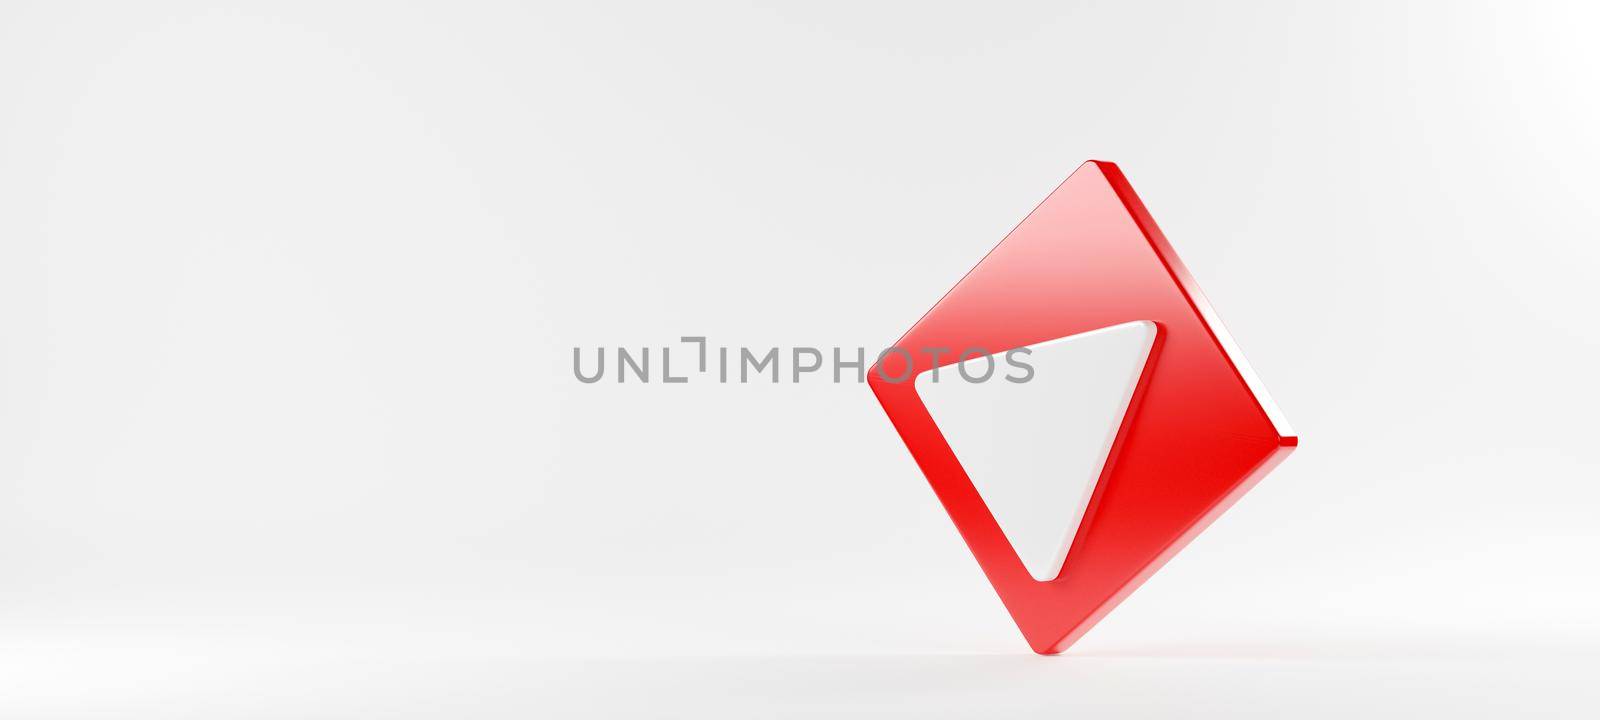 Red play button video icon social media sign player symbol logo on white background for website design and mobile app development, 3D rendering illustration